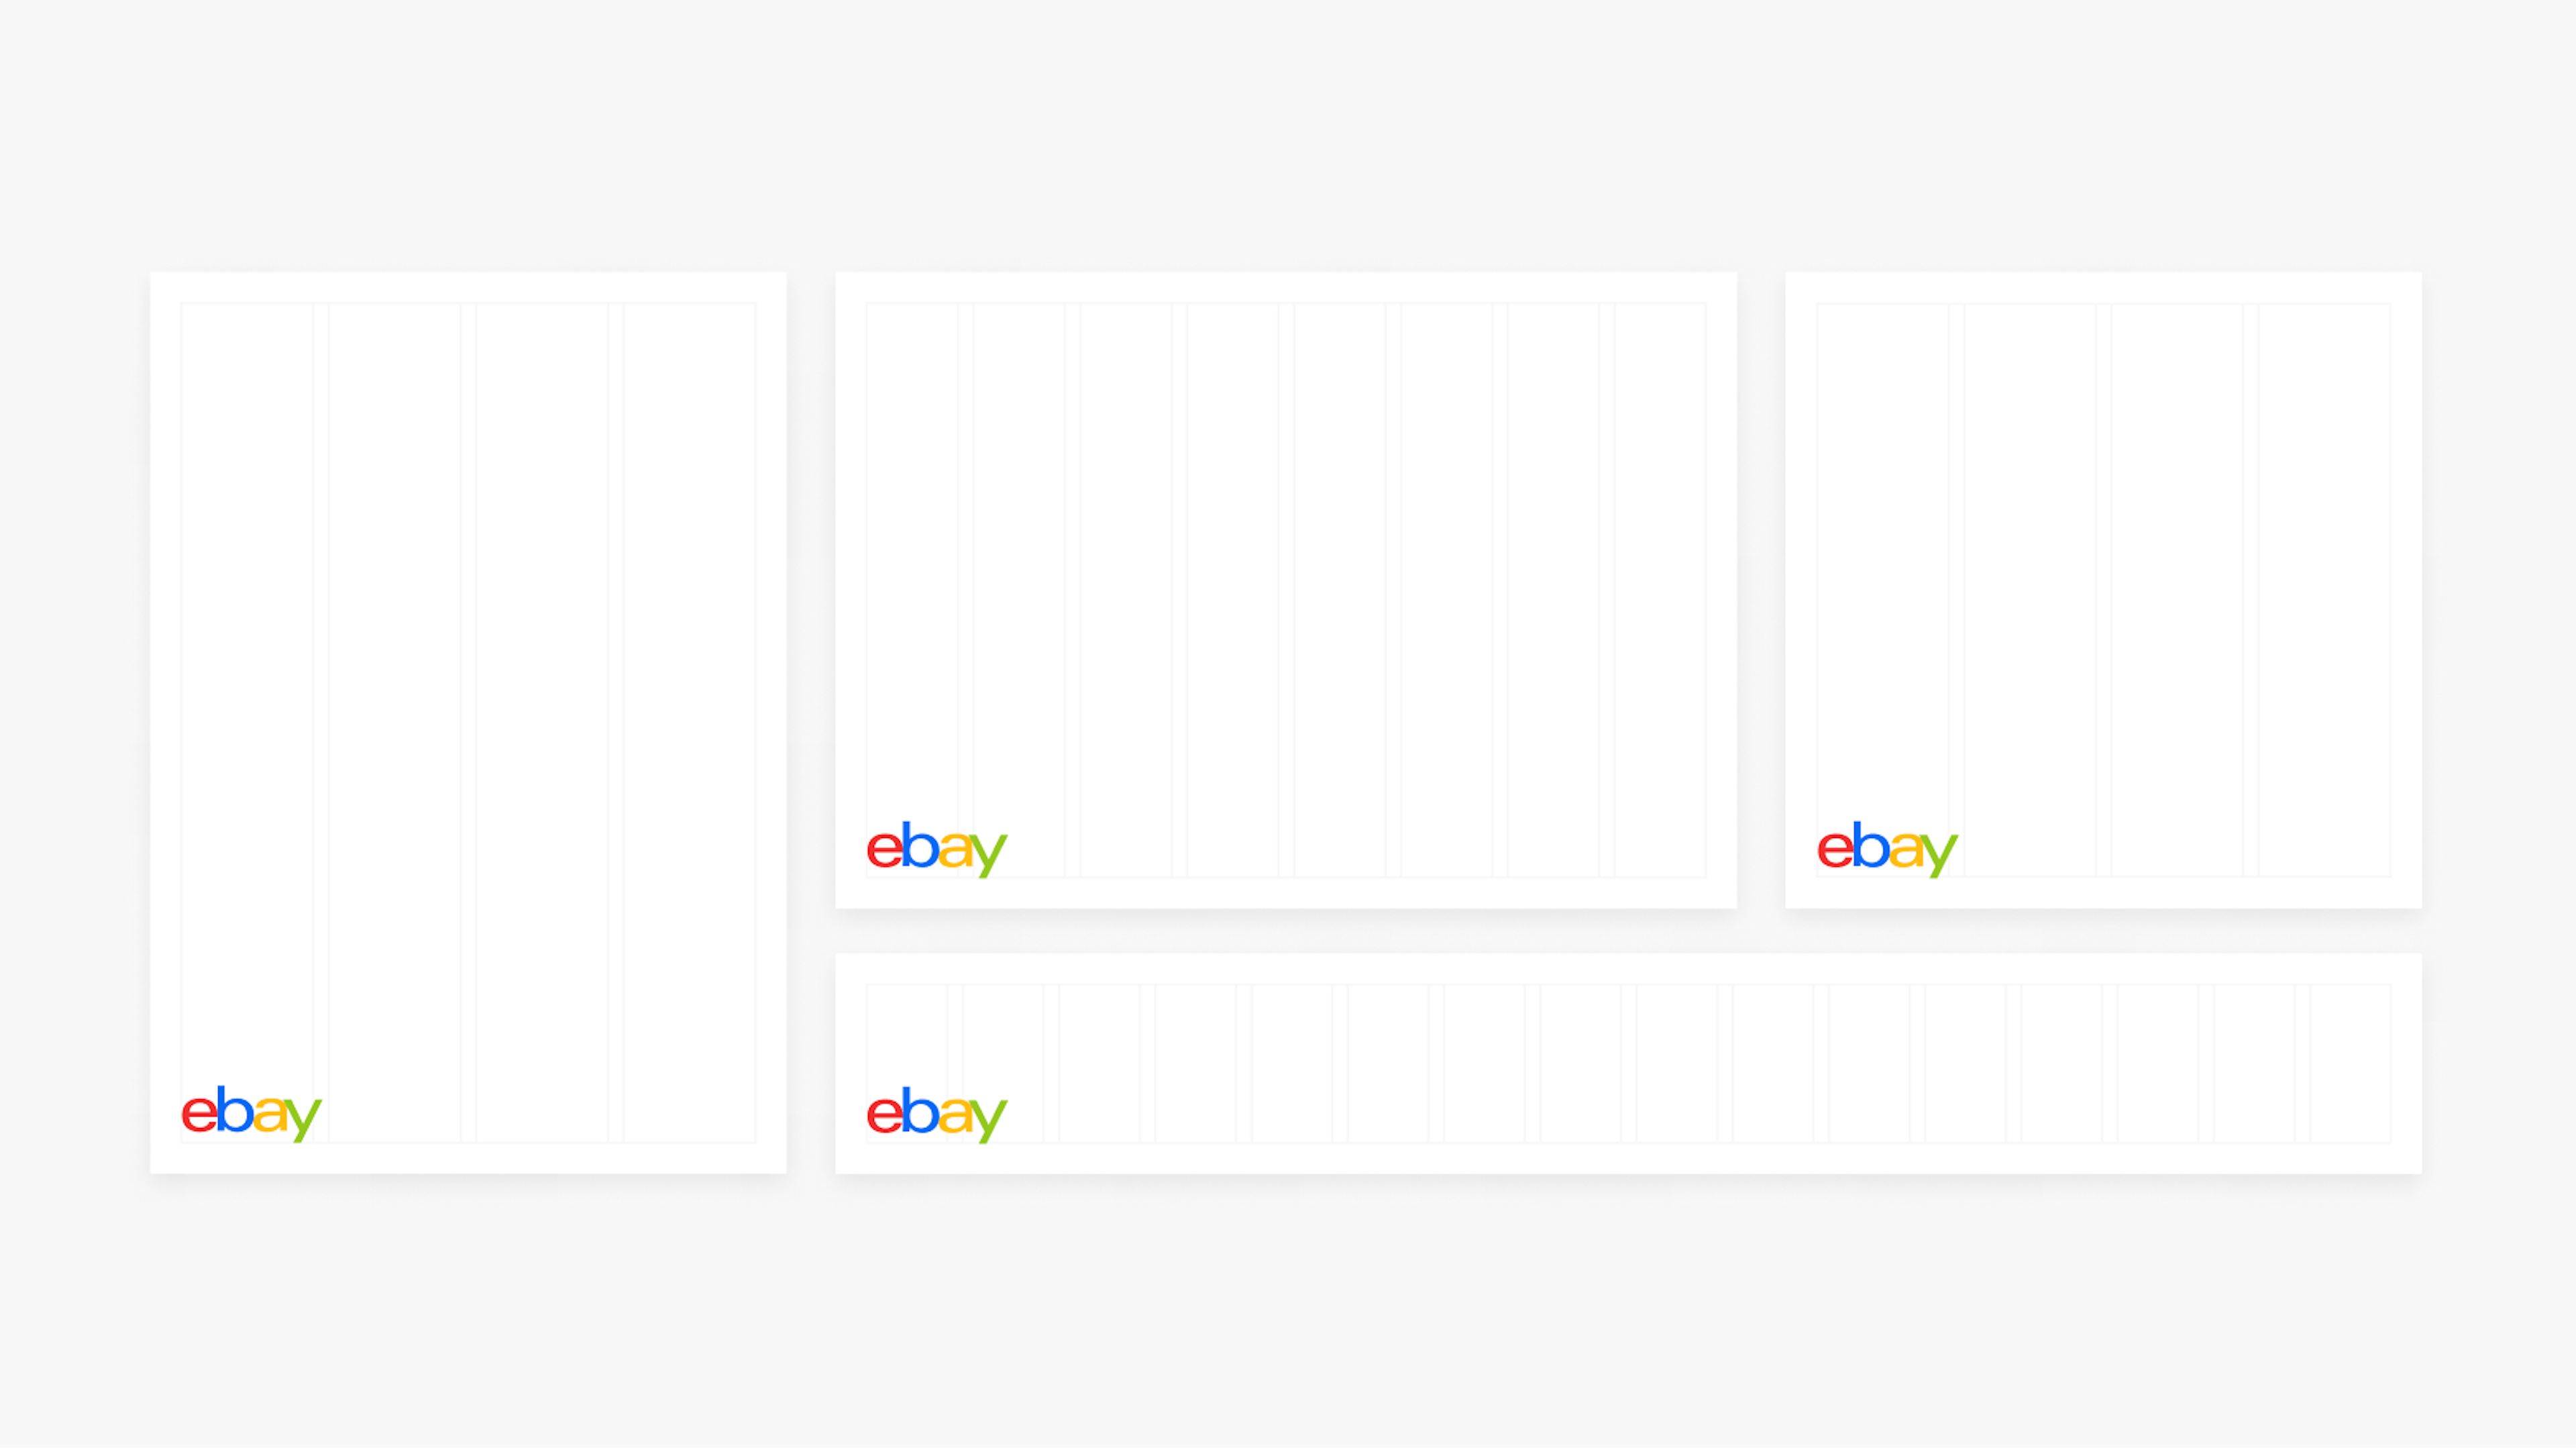 A variety of layout sizes all with the eBay logo in the bottom left following the 5% x-height rule with the 5% margin.